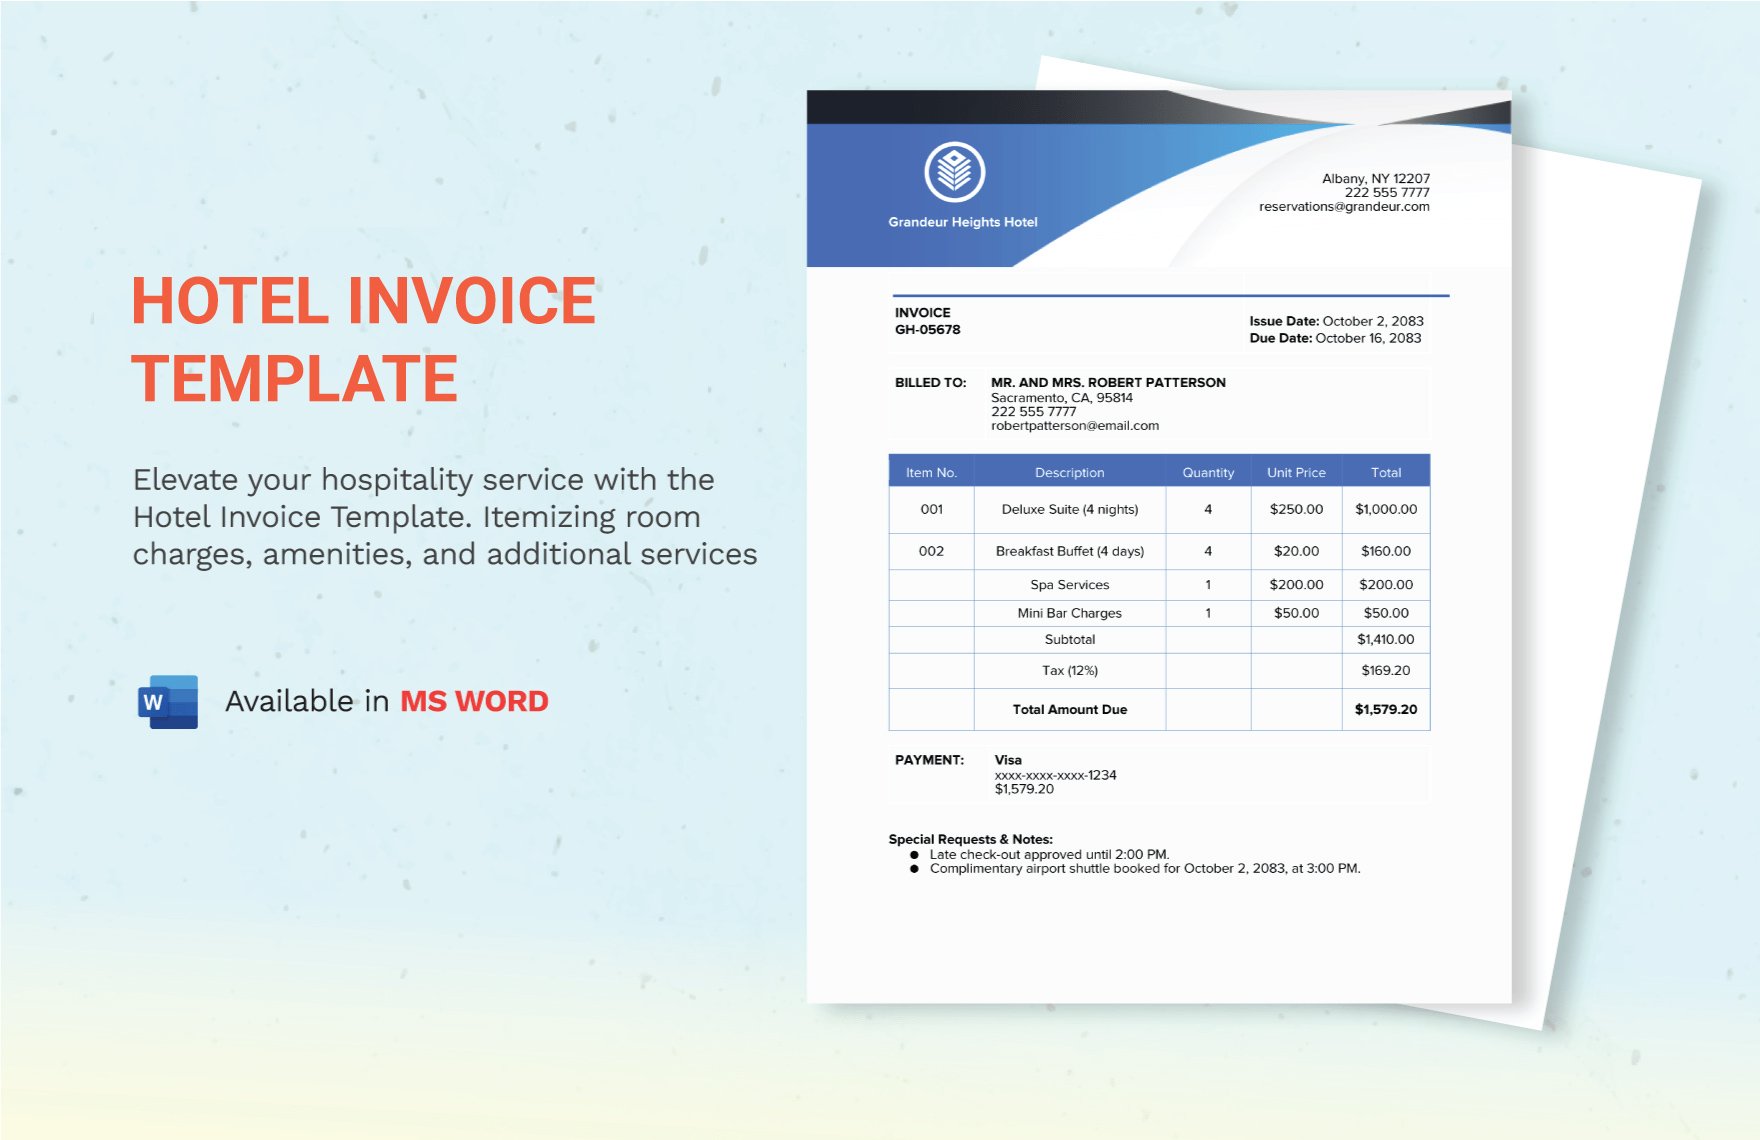 Hotel Invoice Template in Word